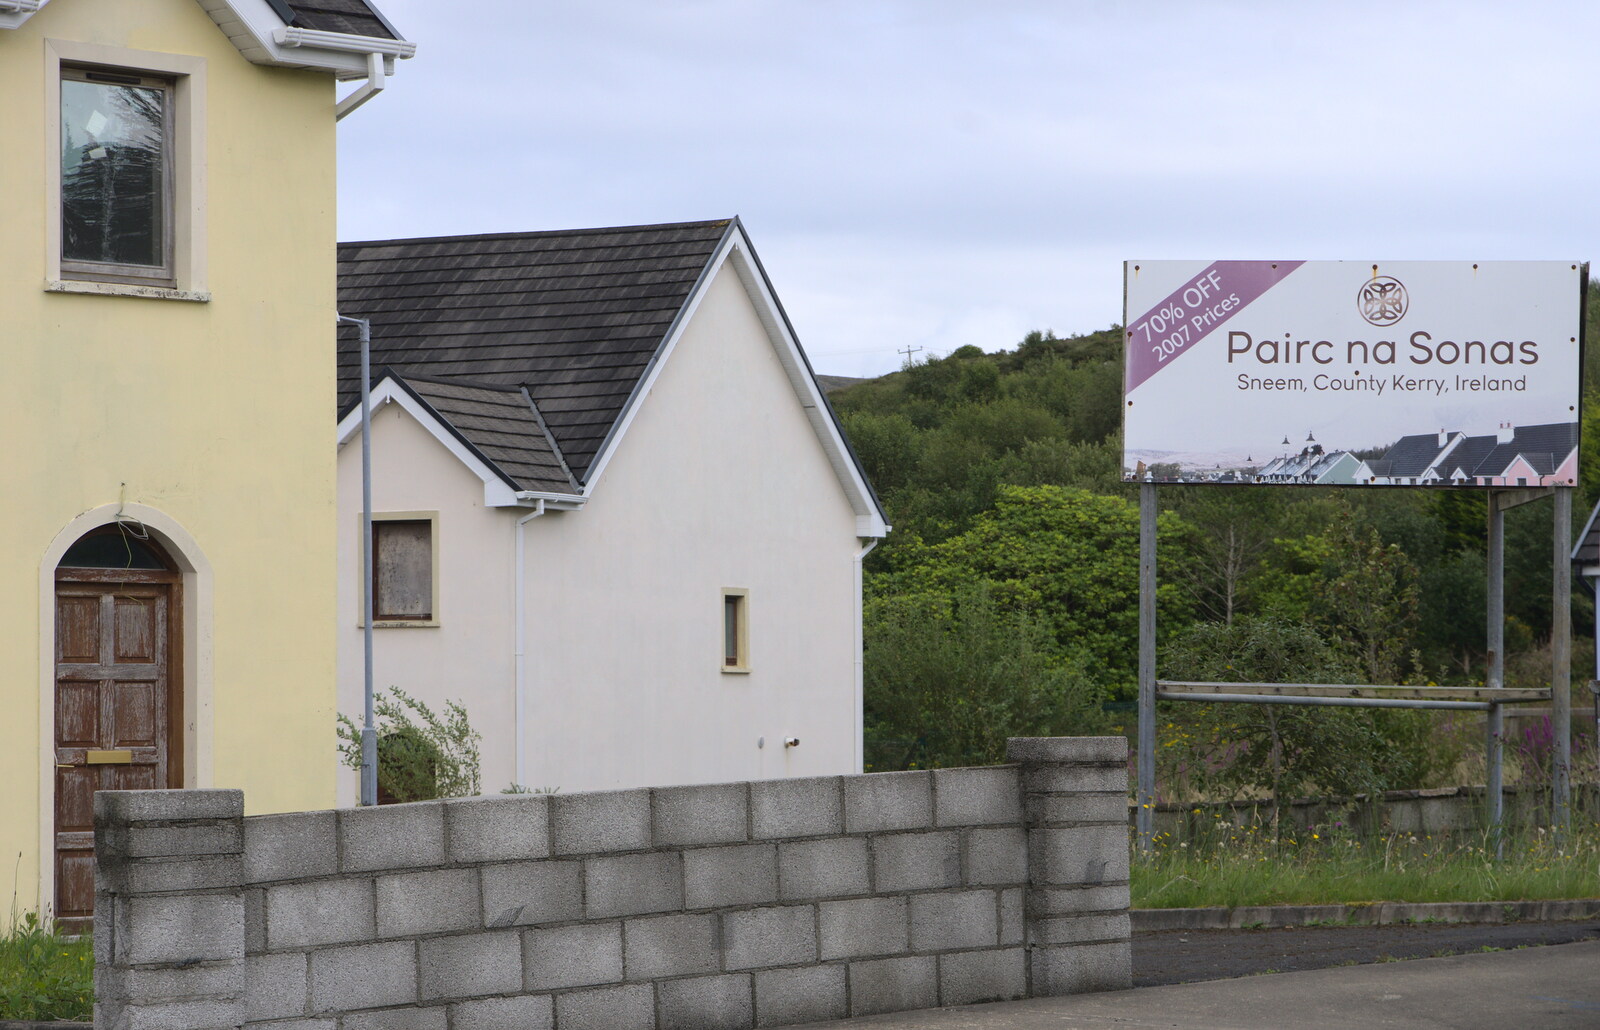 The houses in Pairc na Sonas are 70% off  from Baile an Sceilg to An tSnaidhme, Co. Kerry, Ireland - 31st July 2017